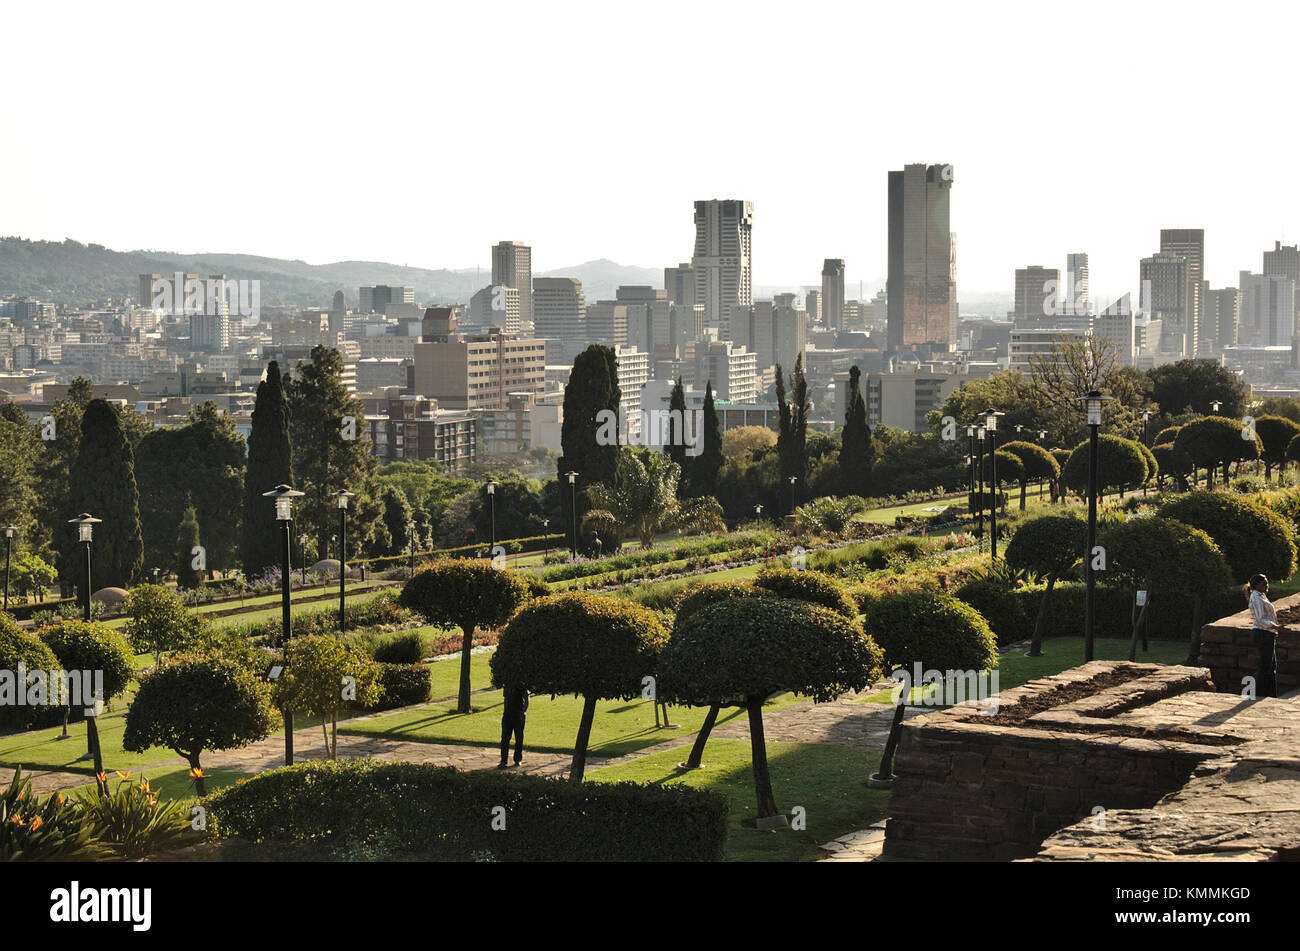 Pretoria, South Africa - 2017: View of the city skyline from the grounds of the Union Buildings, the official seat of the South African government. Stock Photo